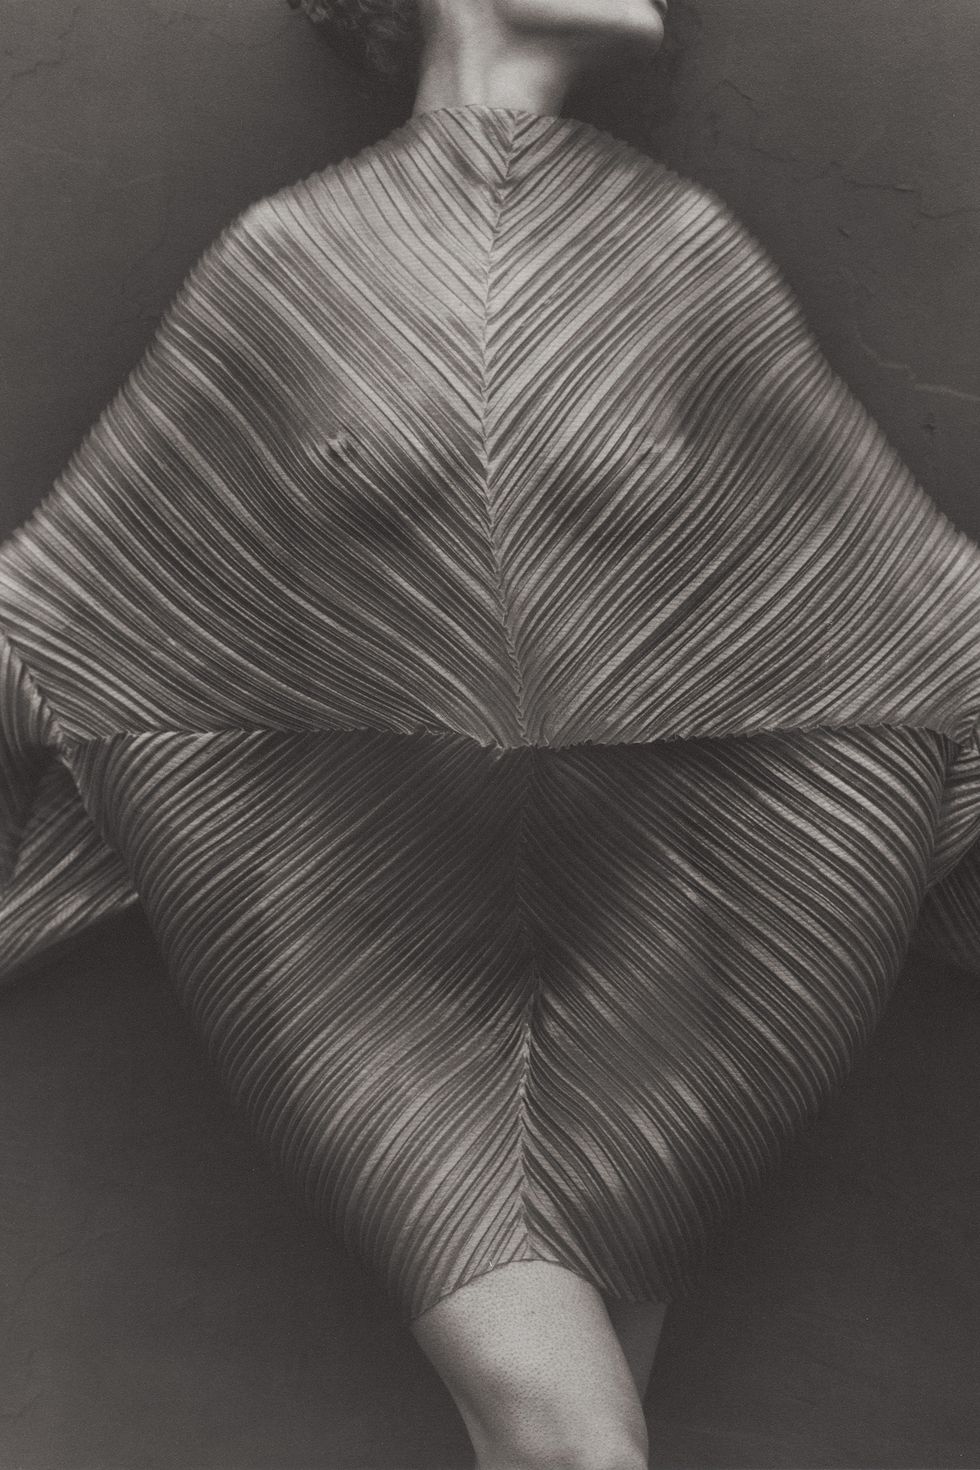 &#x9;Wrapped Torso, Los Angeles&#x9;Herb Ritts (American, 1952–2002)&#x9;1989&#x9;Photograph, platinum print&#x9;*Museum of Fine Arts, Boston. Gift of Herb Ritts&#x9;*© Herb Ritts Foundation&#x9;*Photograph © Museum of Fine Arts, Boston